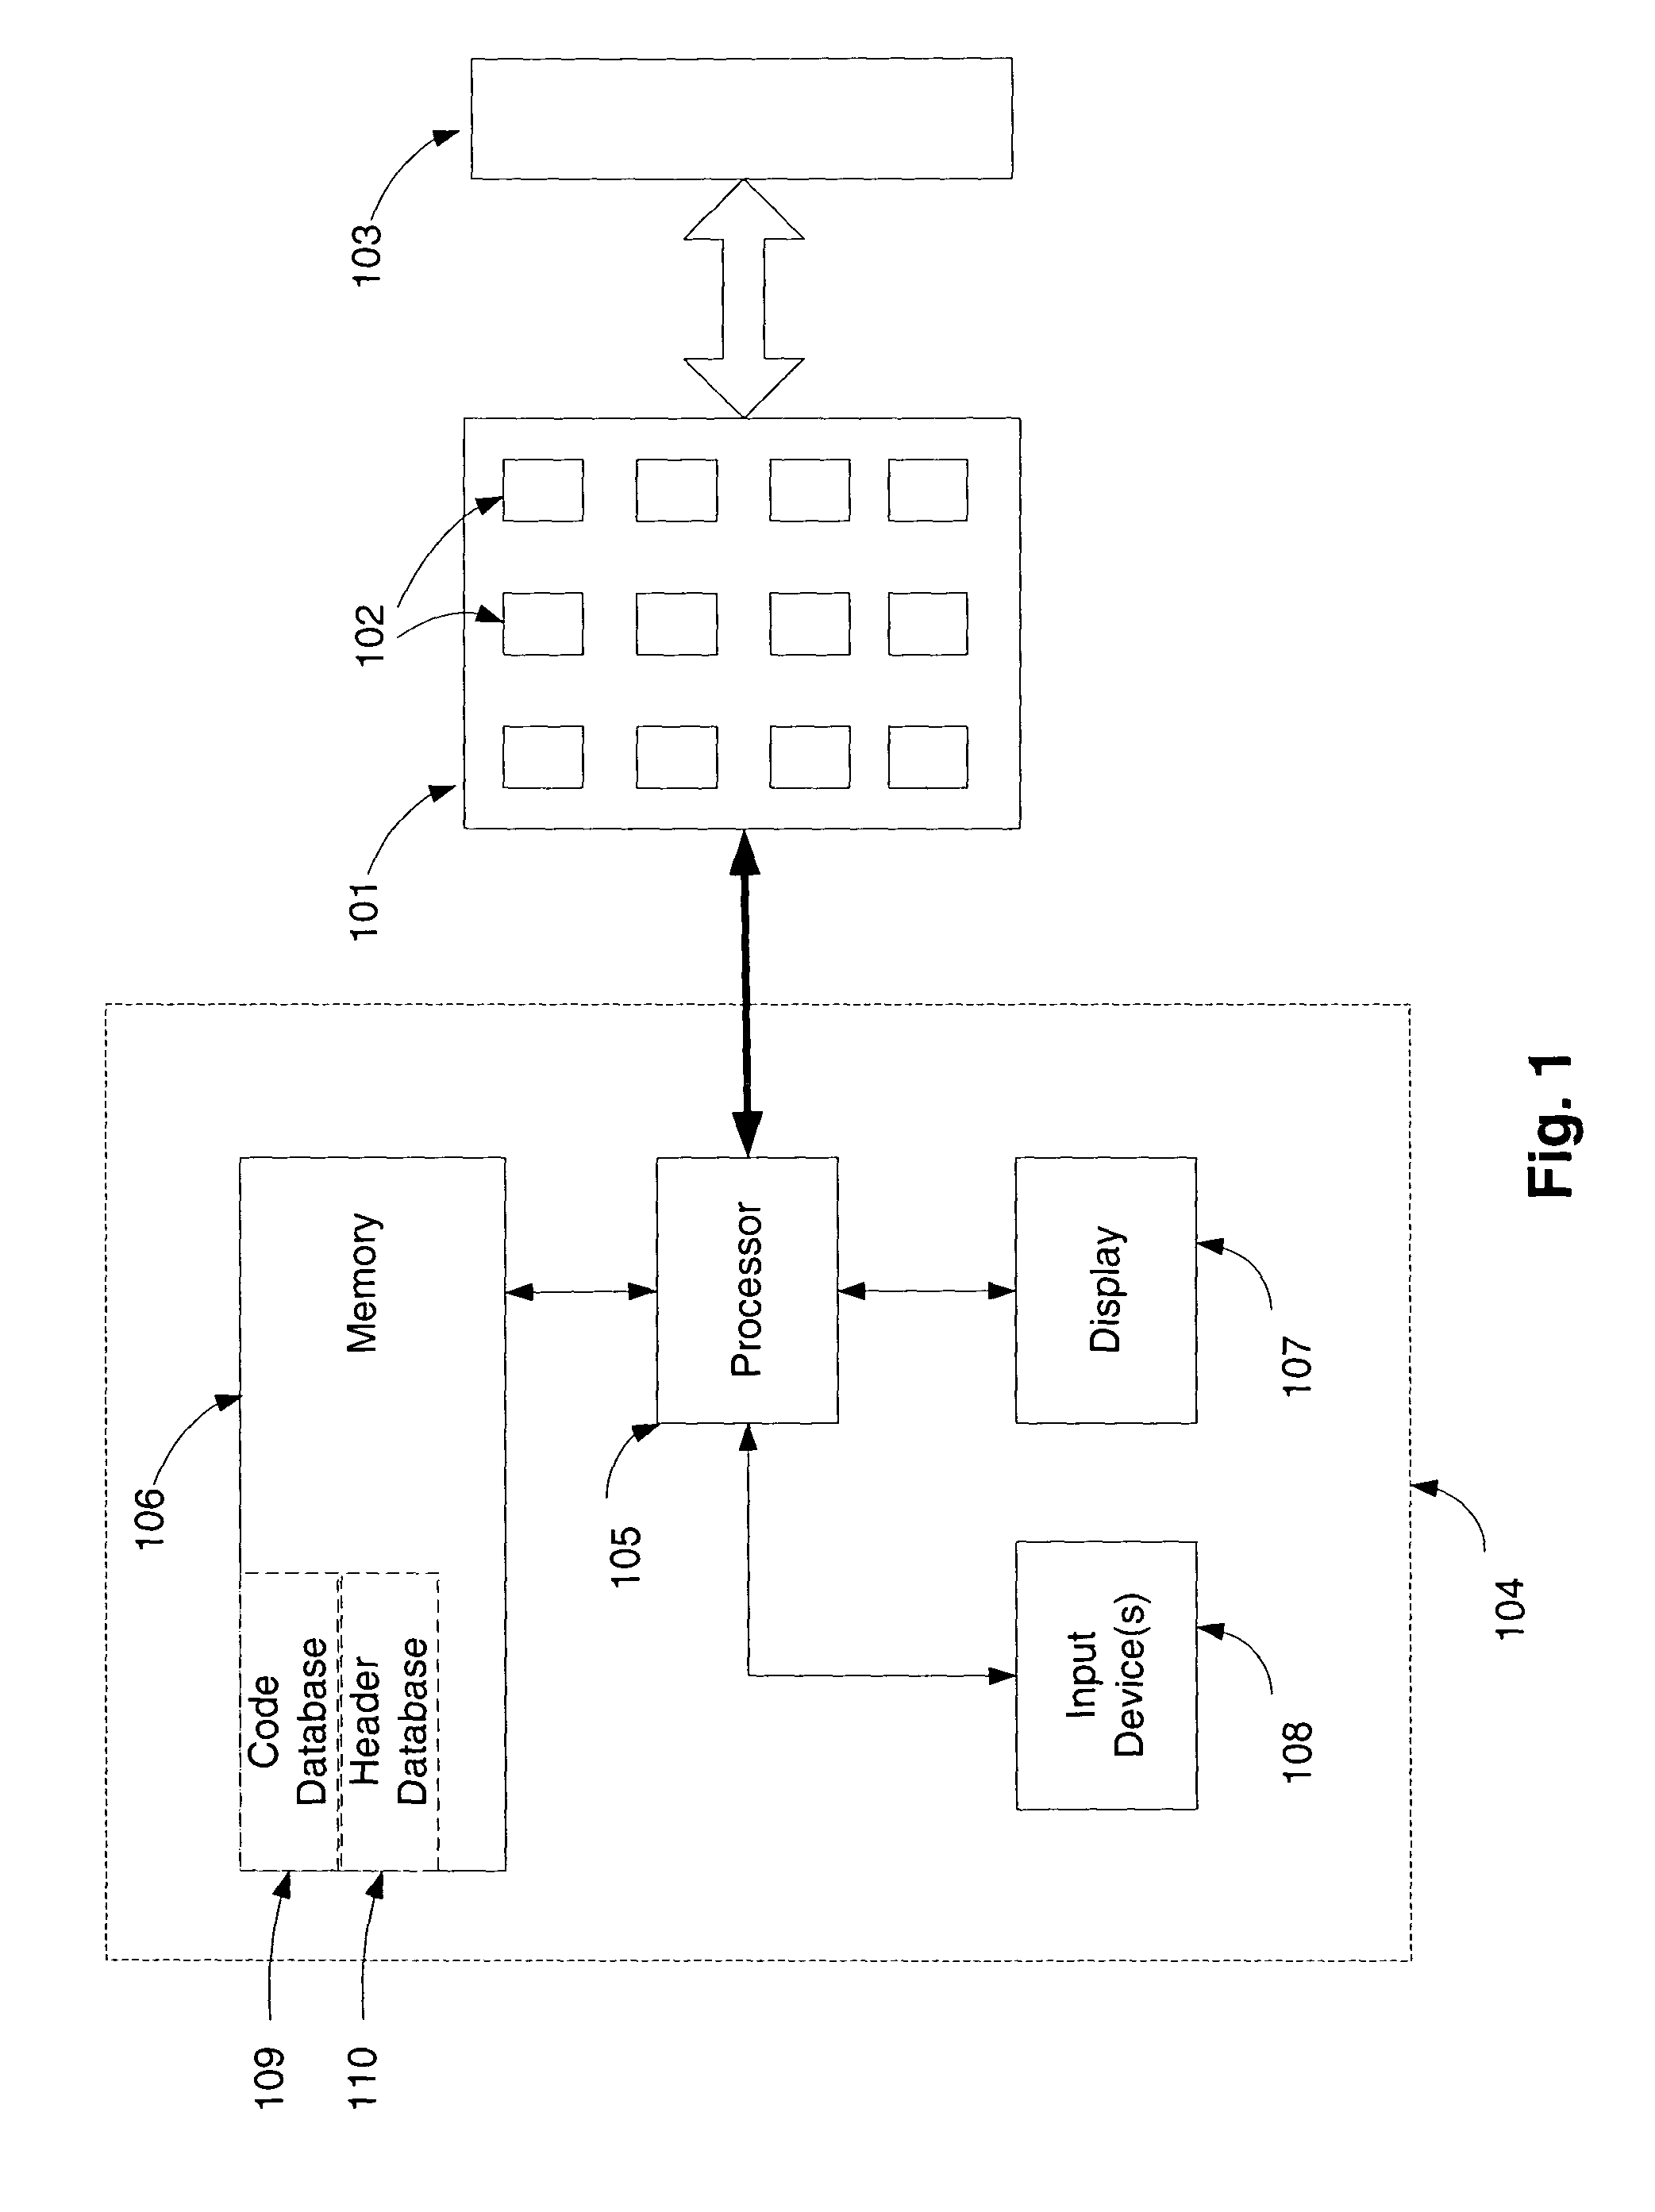 Polymorphic computational system and method in signals intelligence analysis